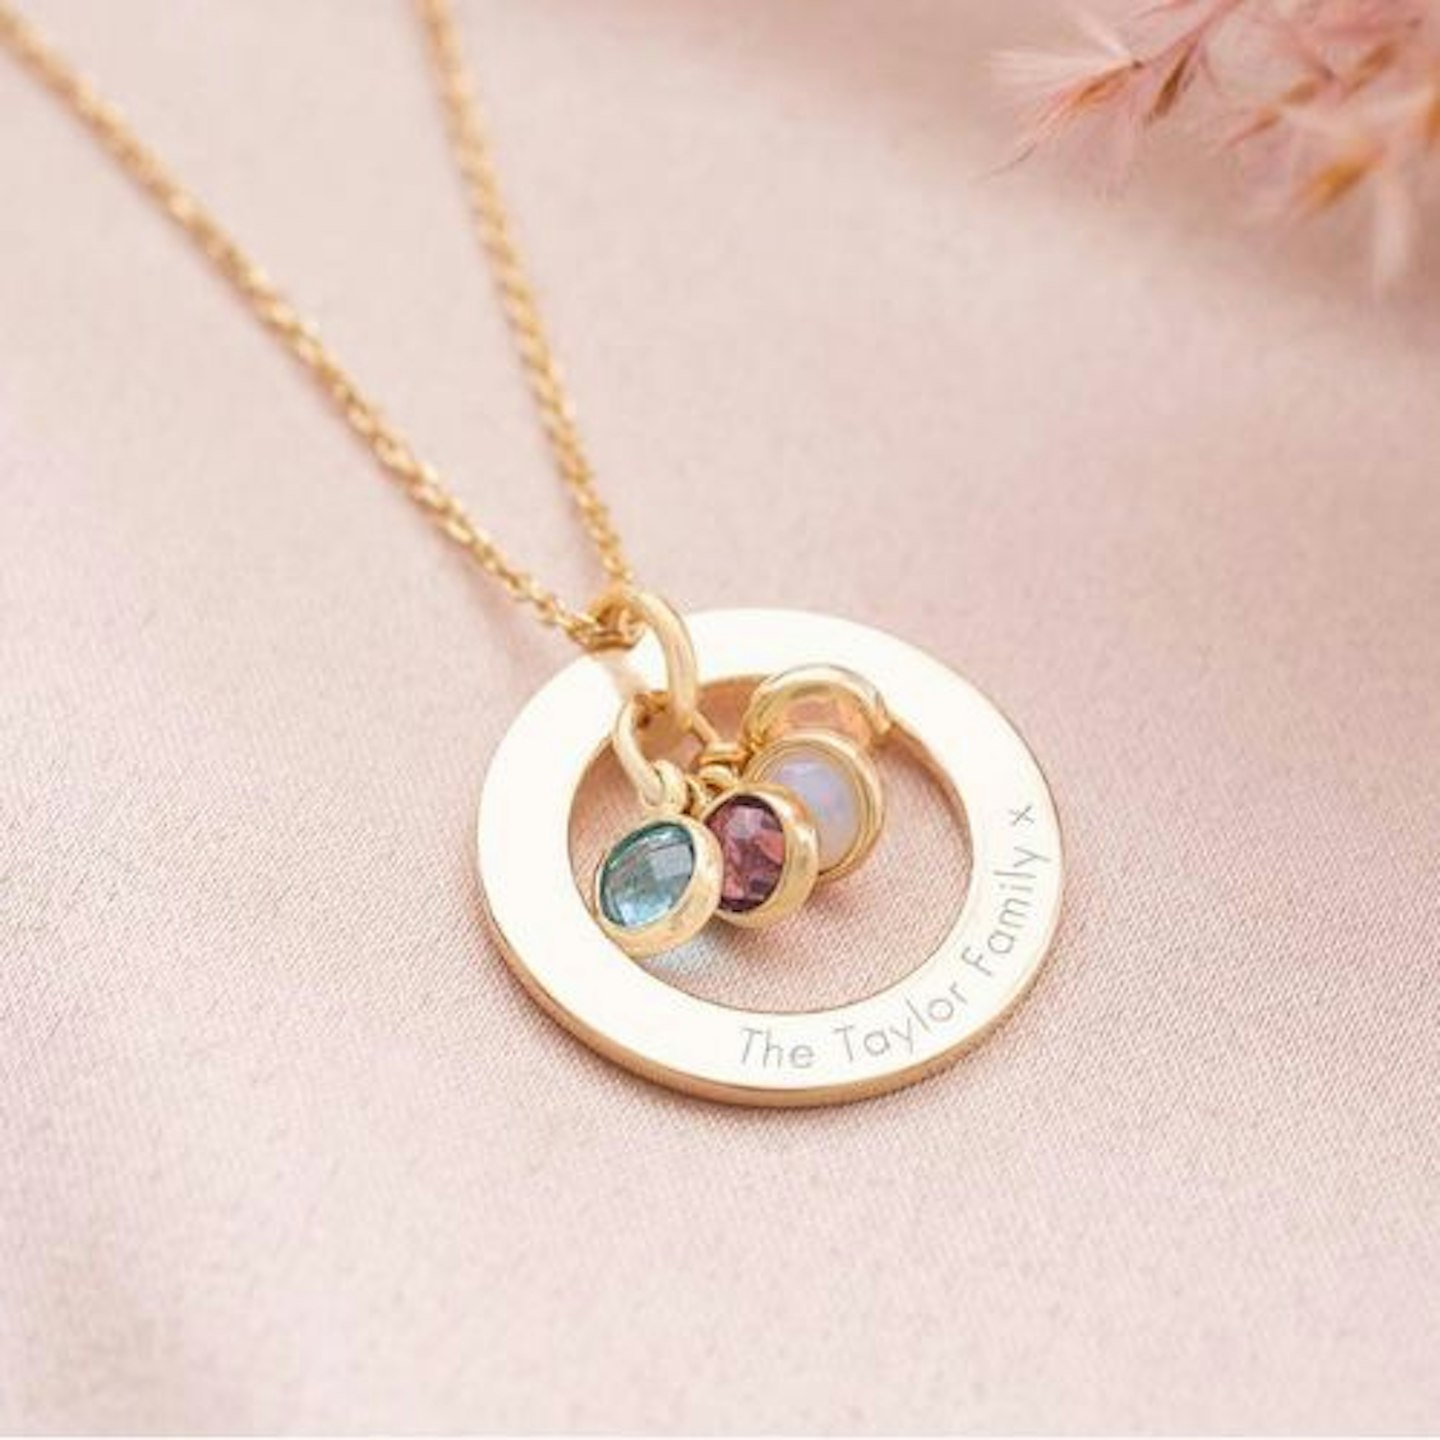 Best Not On The High Street Gifts Family Eternal Ring Birthstone Necklace